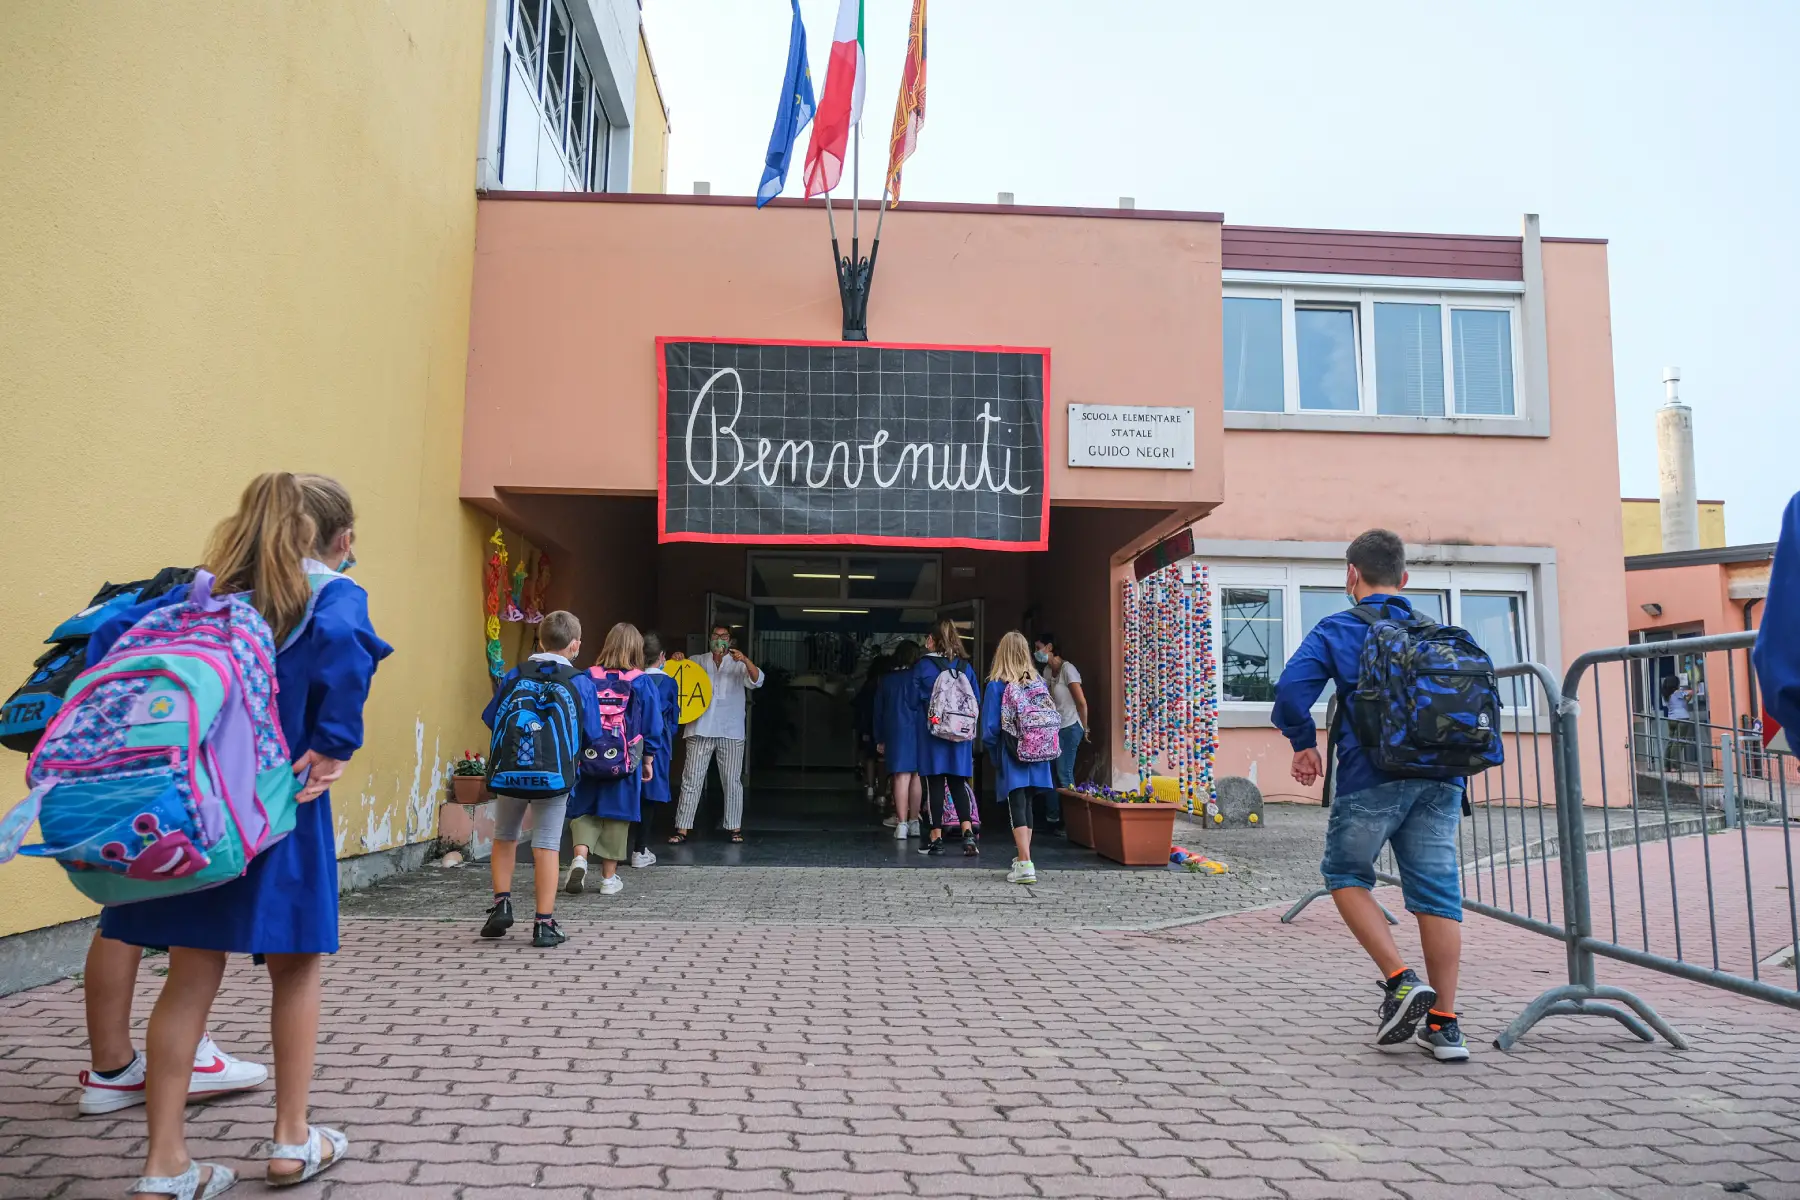 Primary students with backpacks enter their school, a welcome sign reading Benvenuti is above the entrance